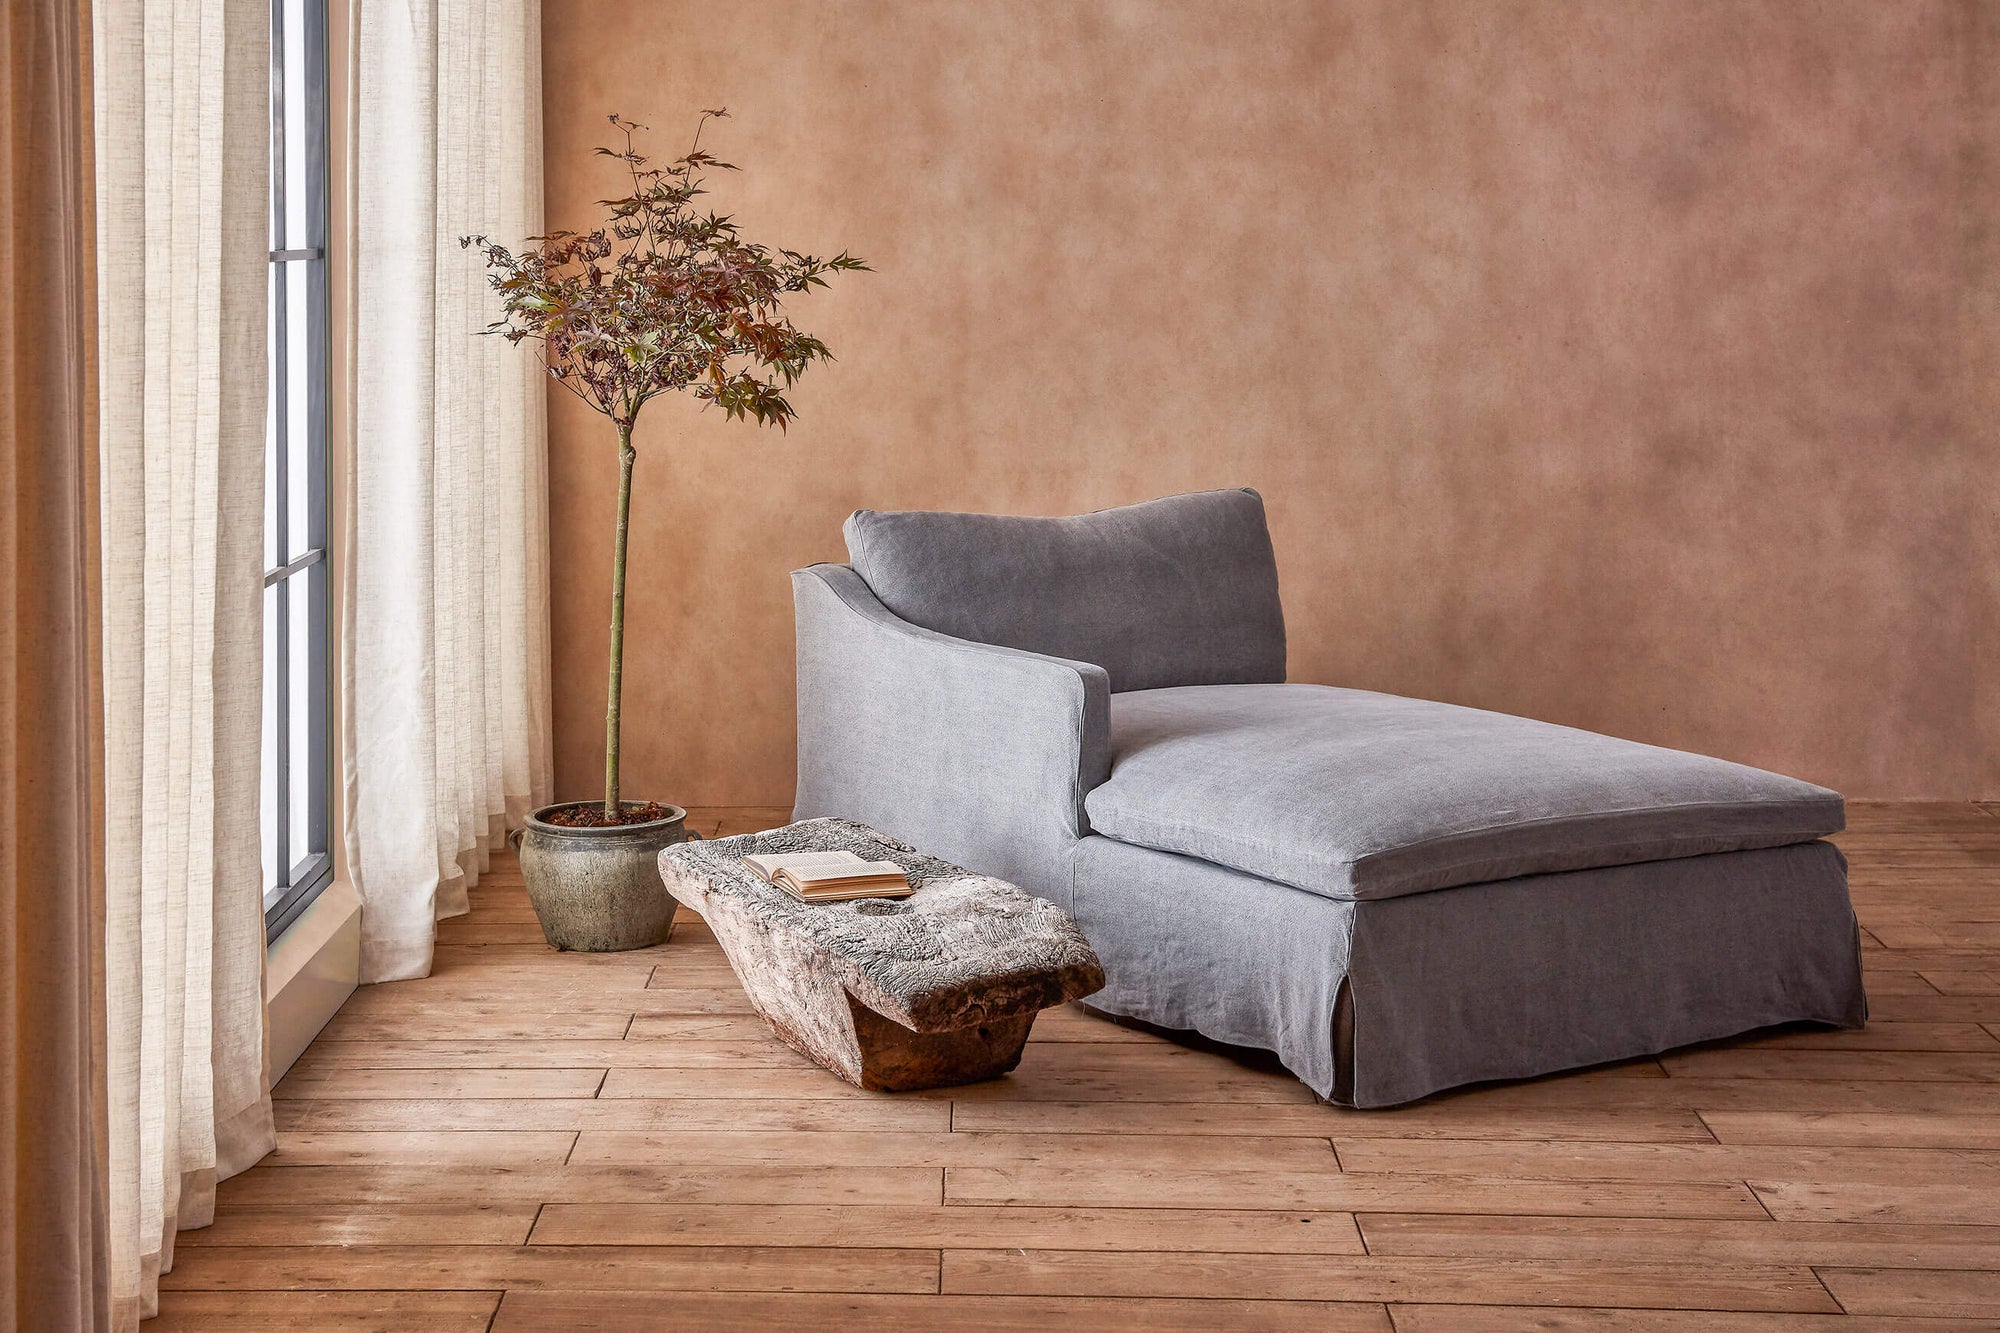 Amelia Left Arm Facing Daybed in Ink Cap, a medium cool grey Light Weight Linen, placed in a warmly lit room next to a stone table and a potted tree